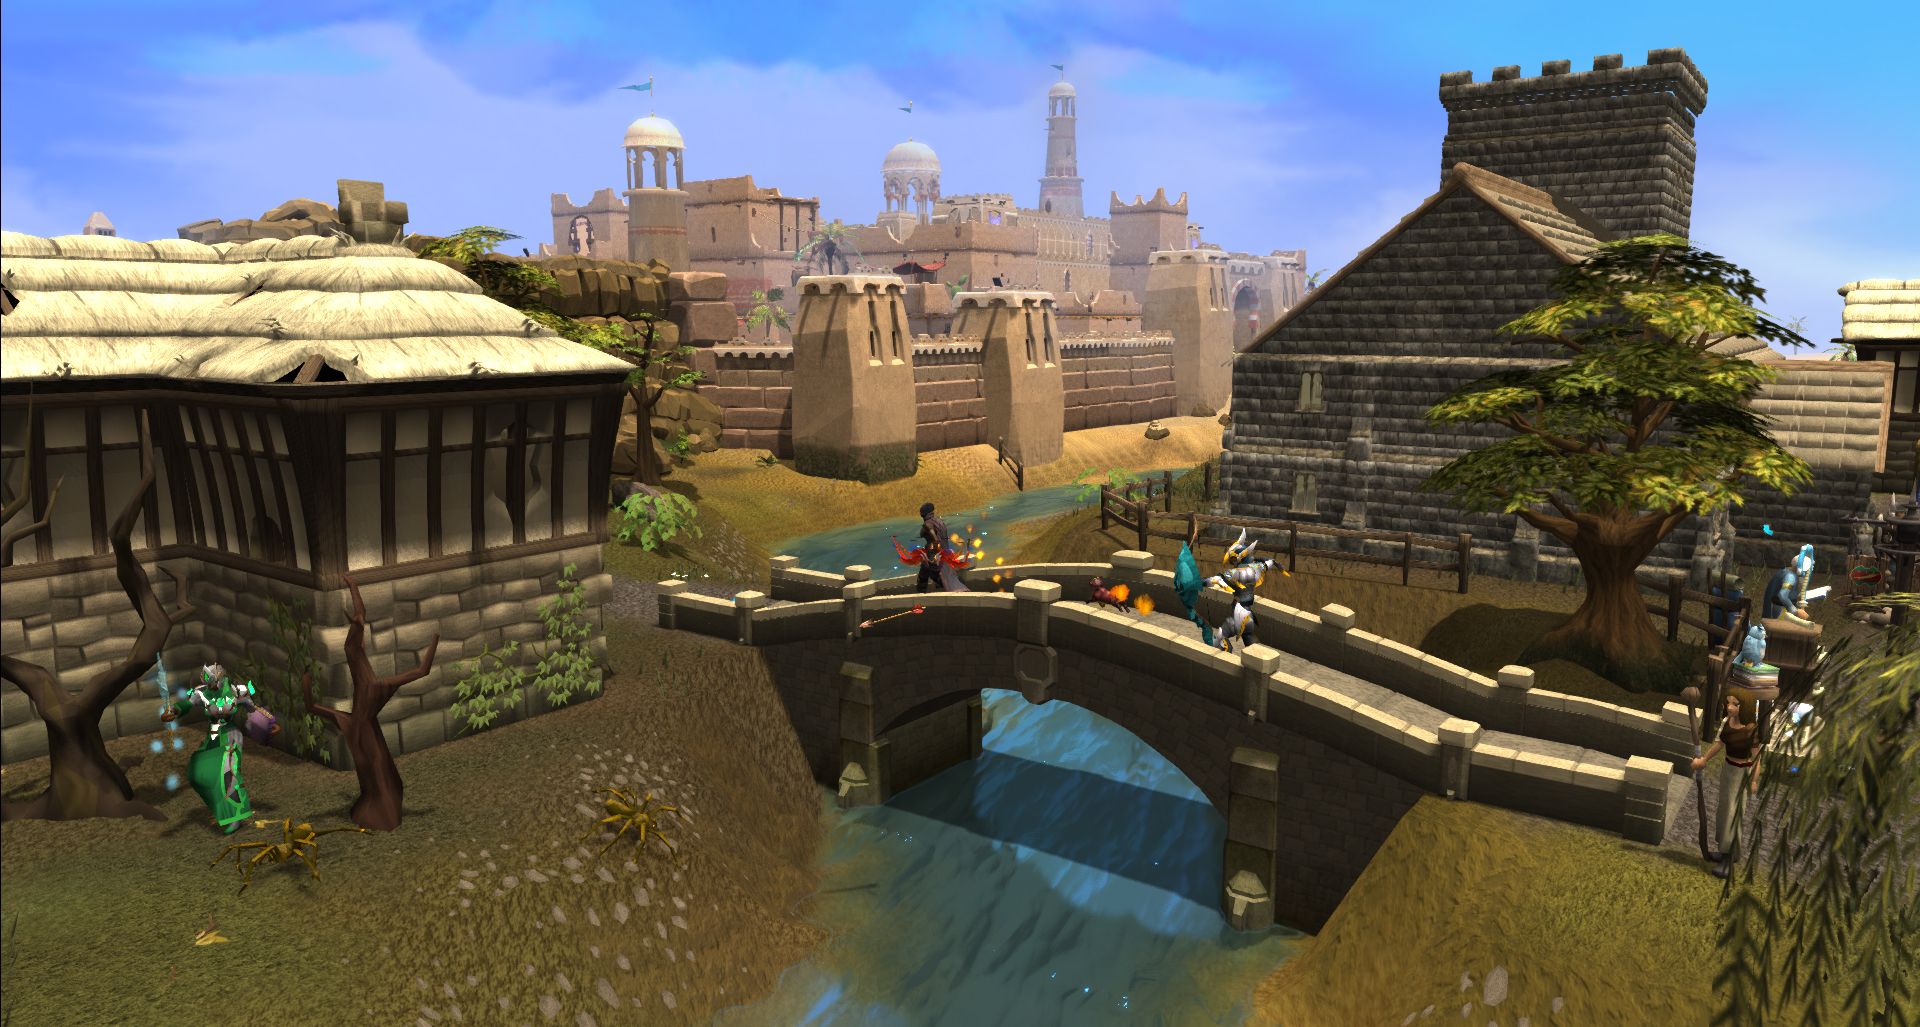 Runescape 3 Enslaving Browsers July 22nd - Niche Gamer